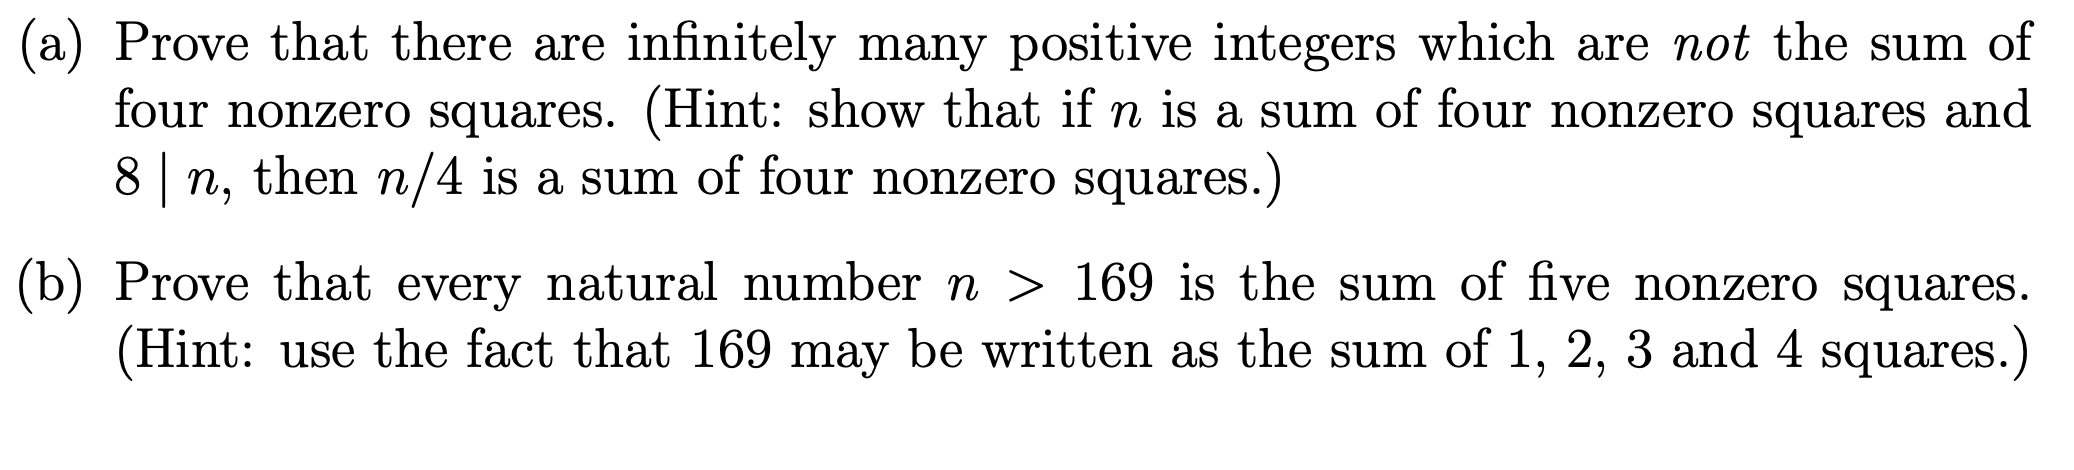 Solved Lagrange's four square theorem says every natural